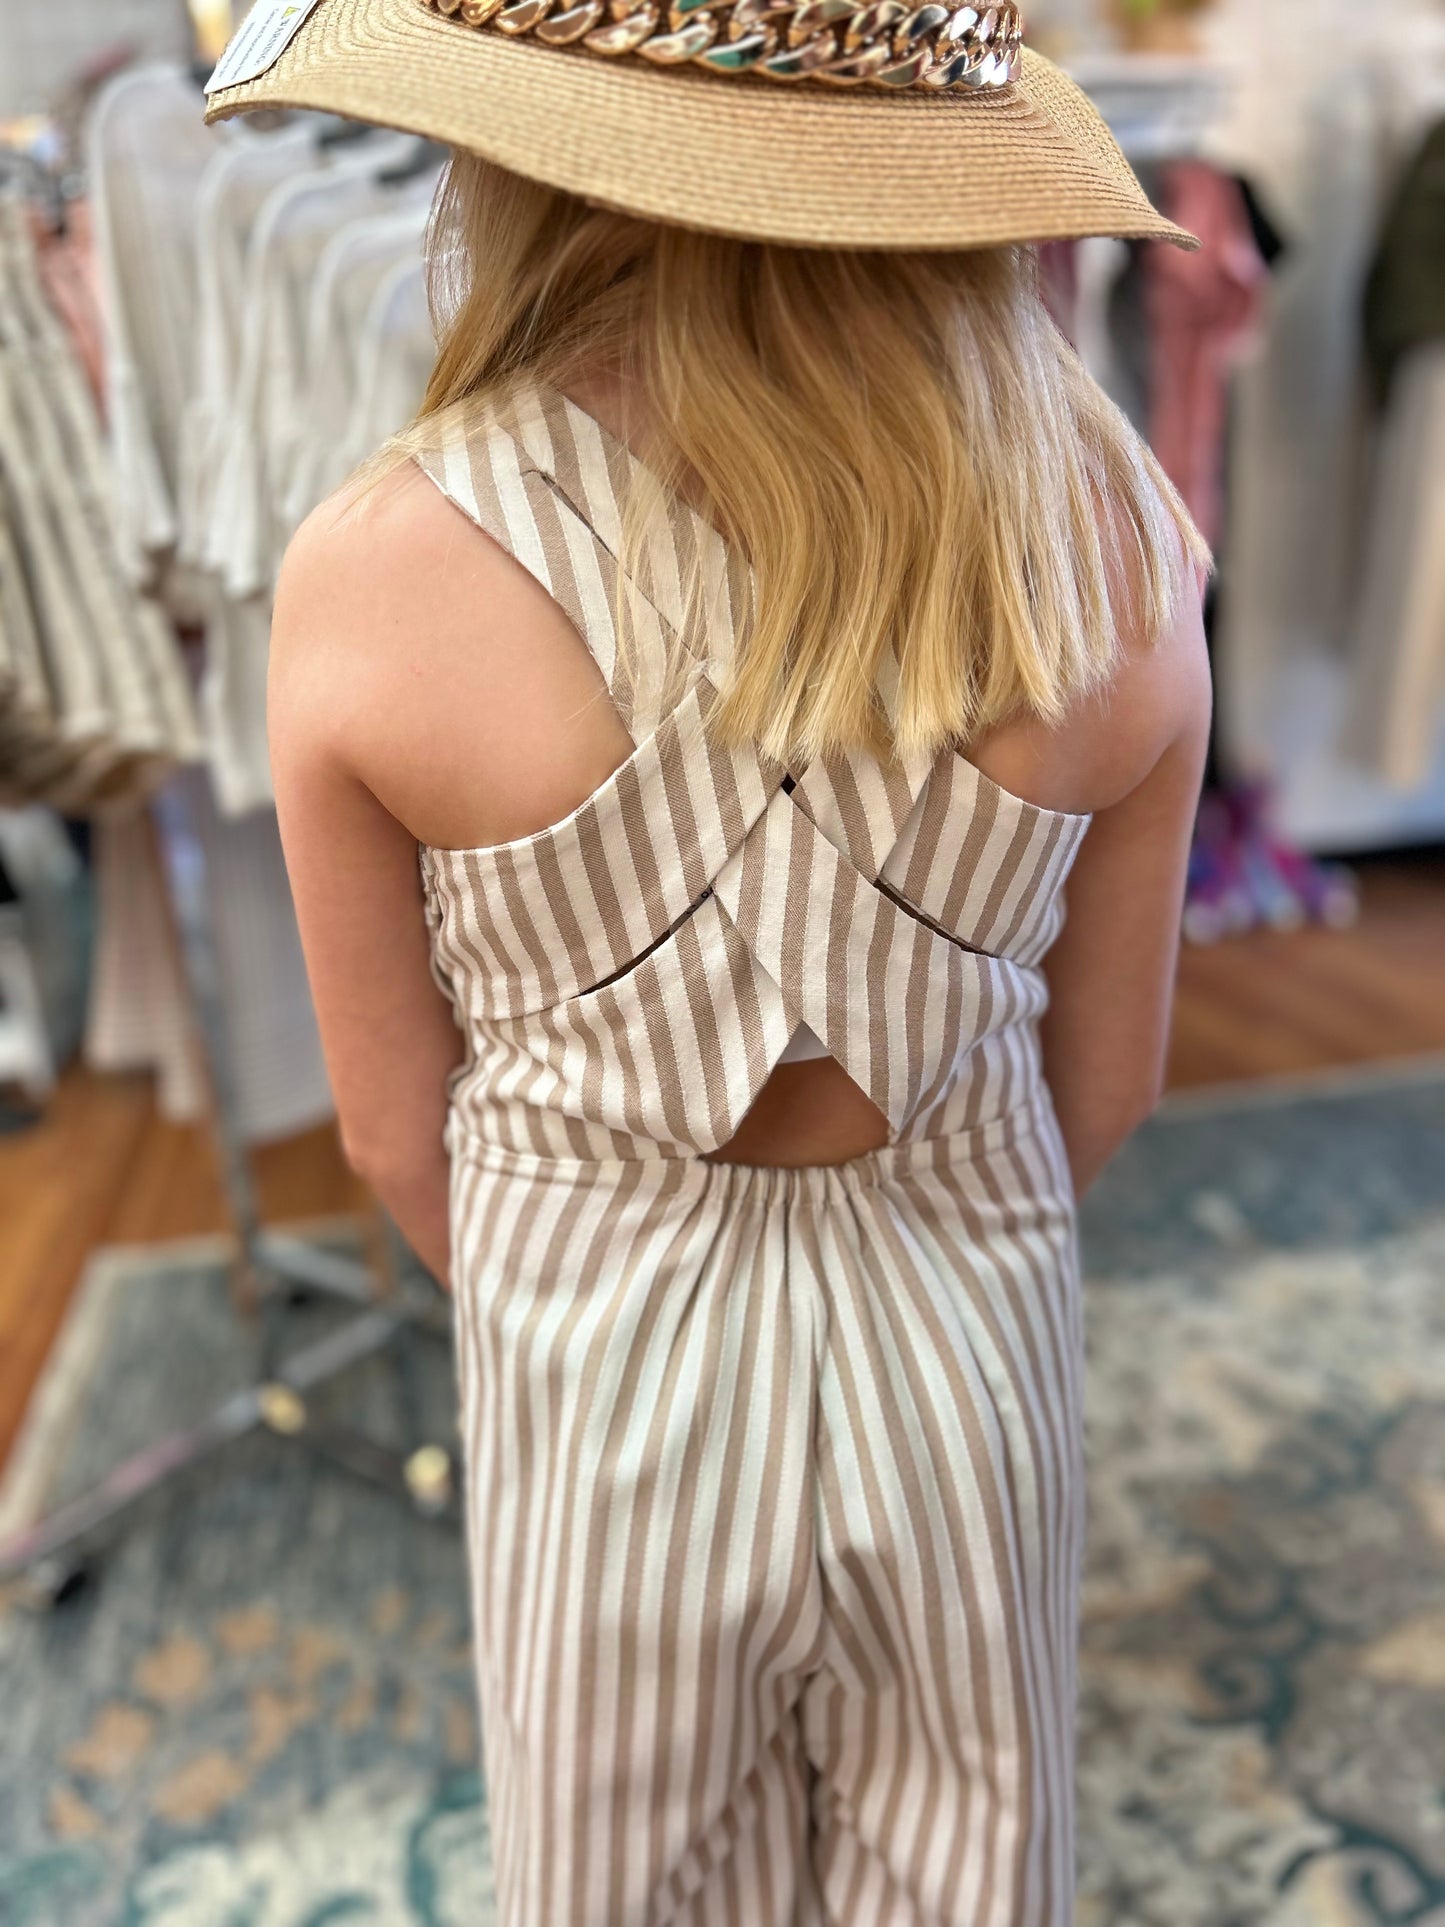 May-Girls Striped Jumpsuit